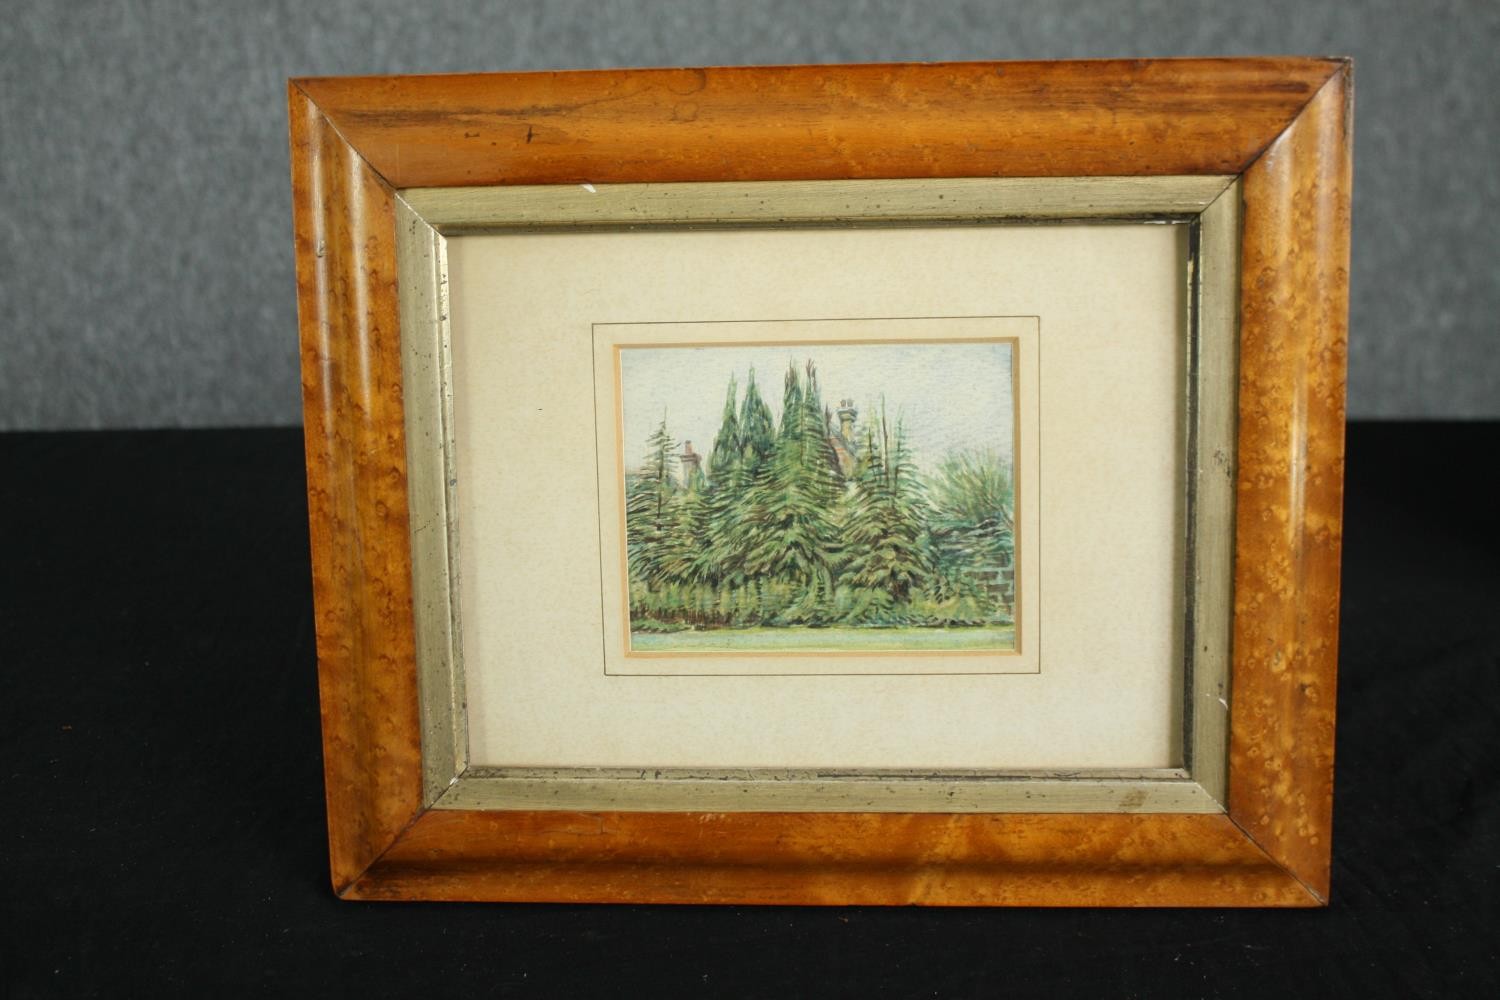 A delicate and controlled watercolour of conifer trees with the top of a house just visible over the - Image 2 of 3